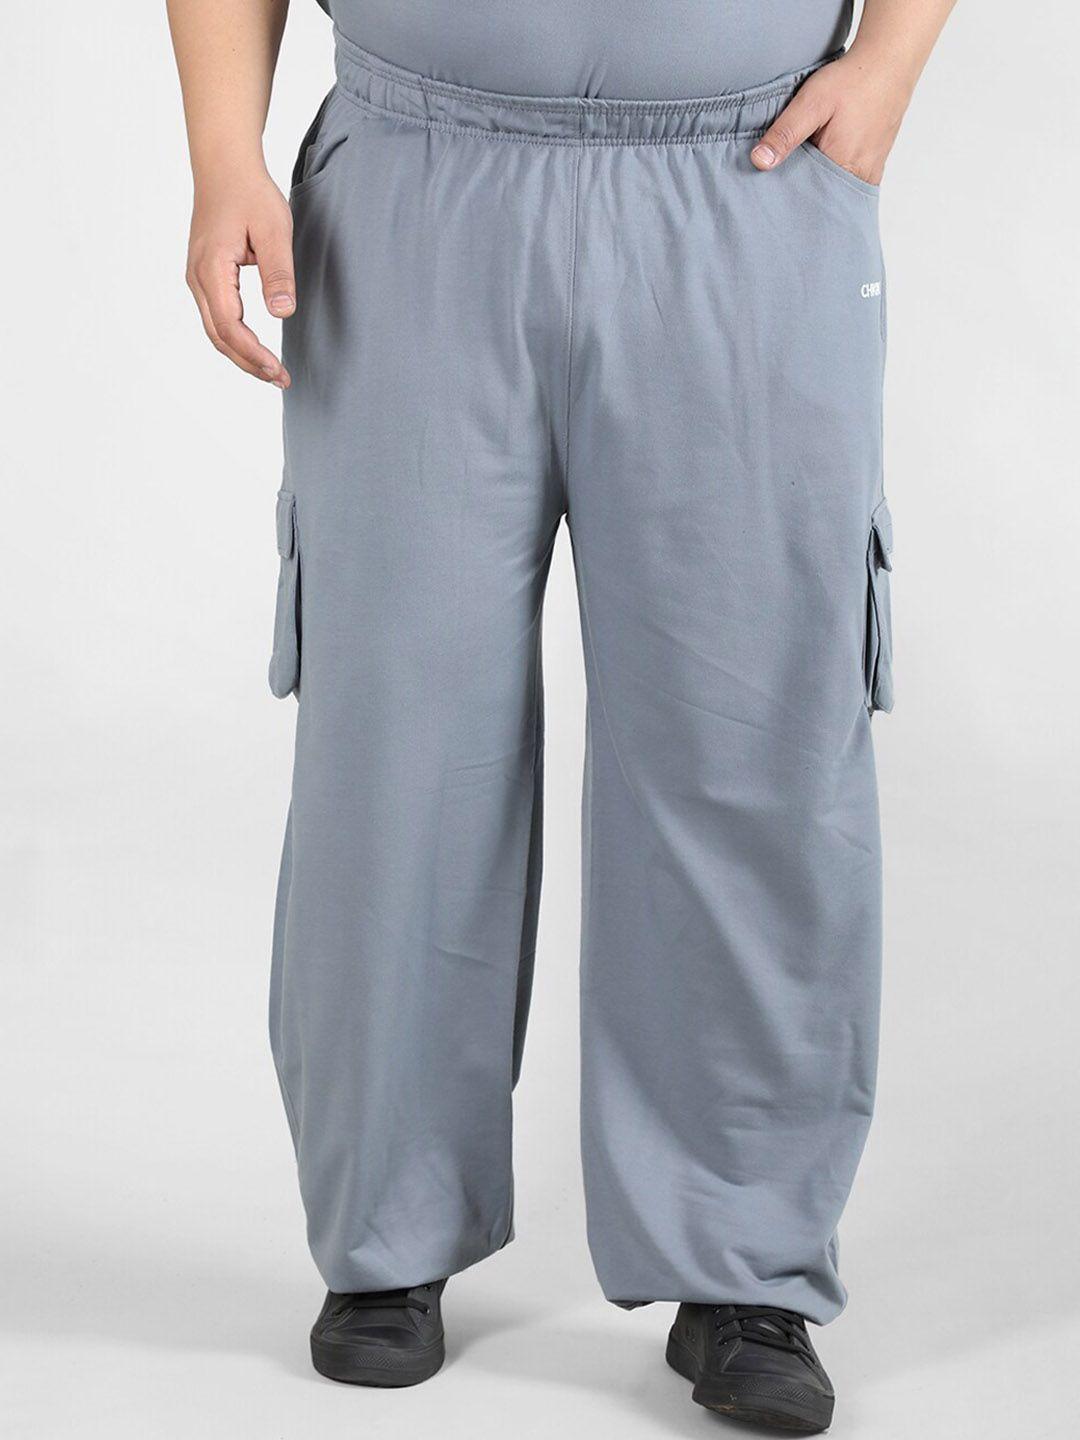 chkokko men plus size mid-rise relaxed-fit track pants